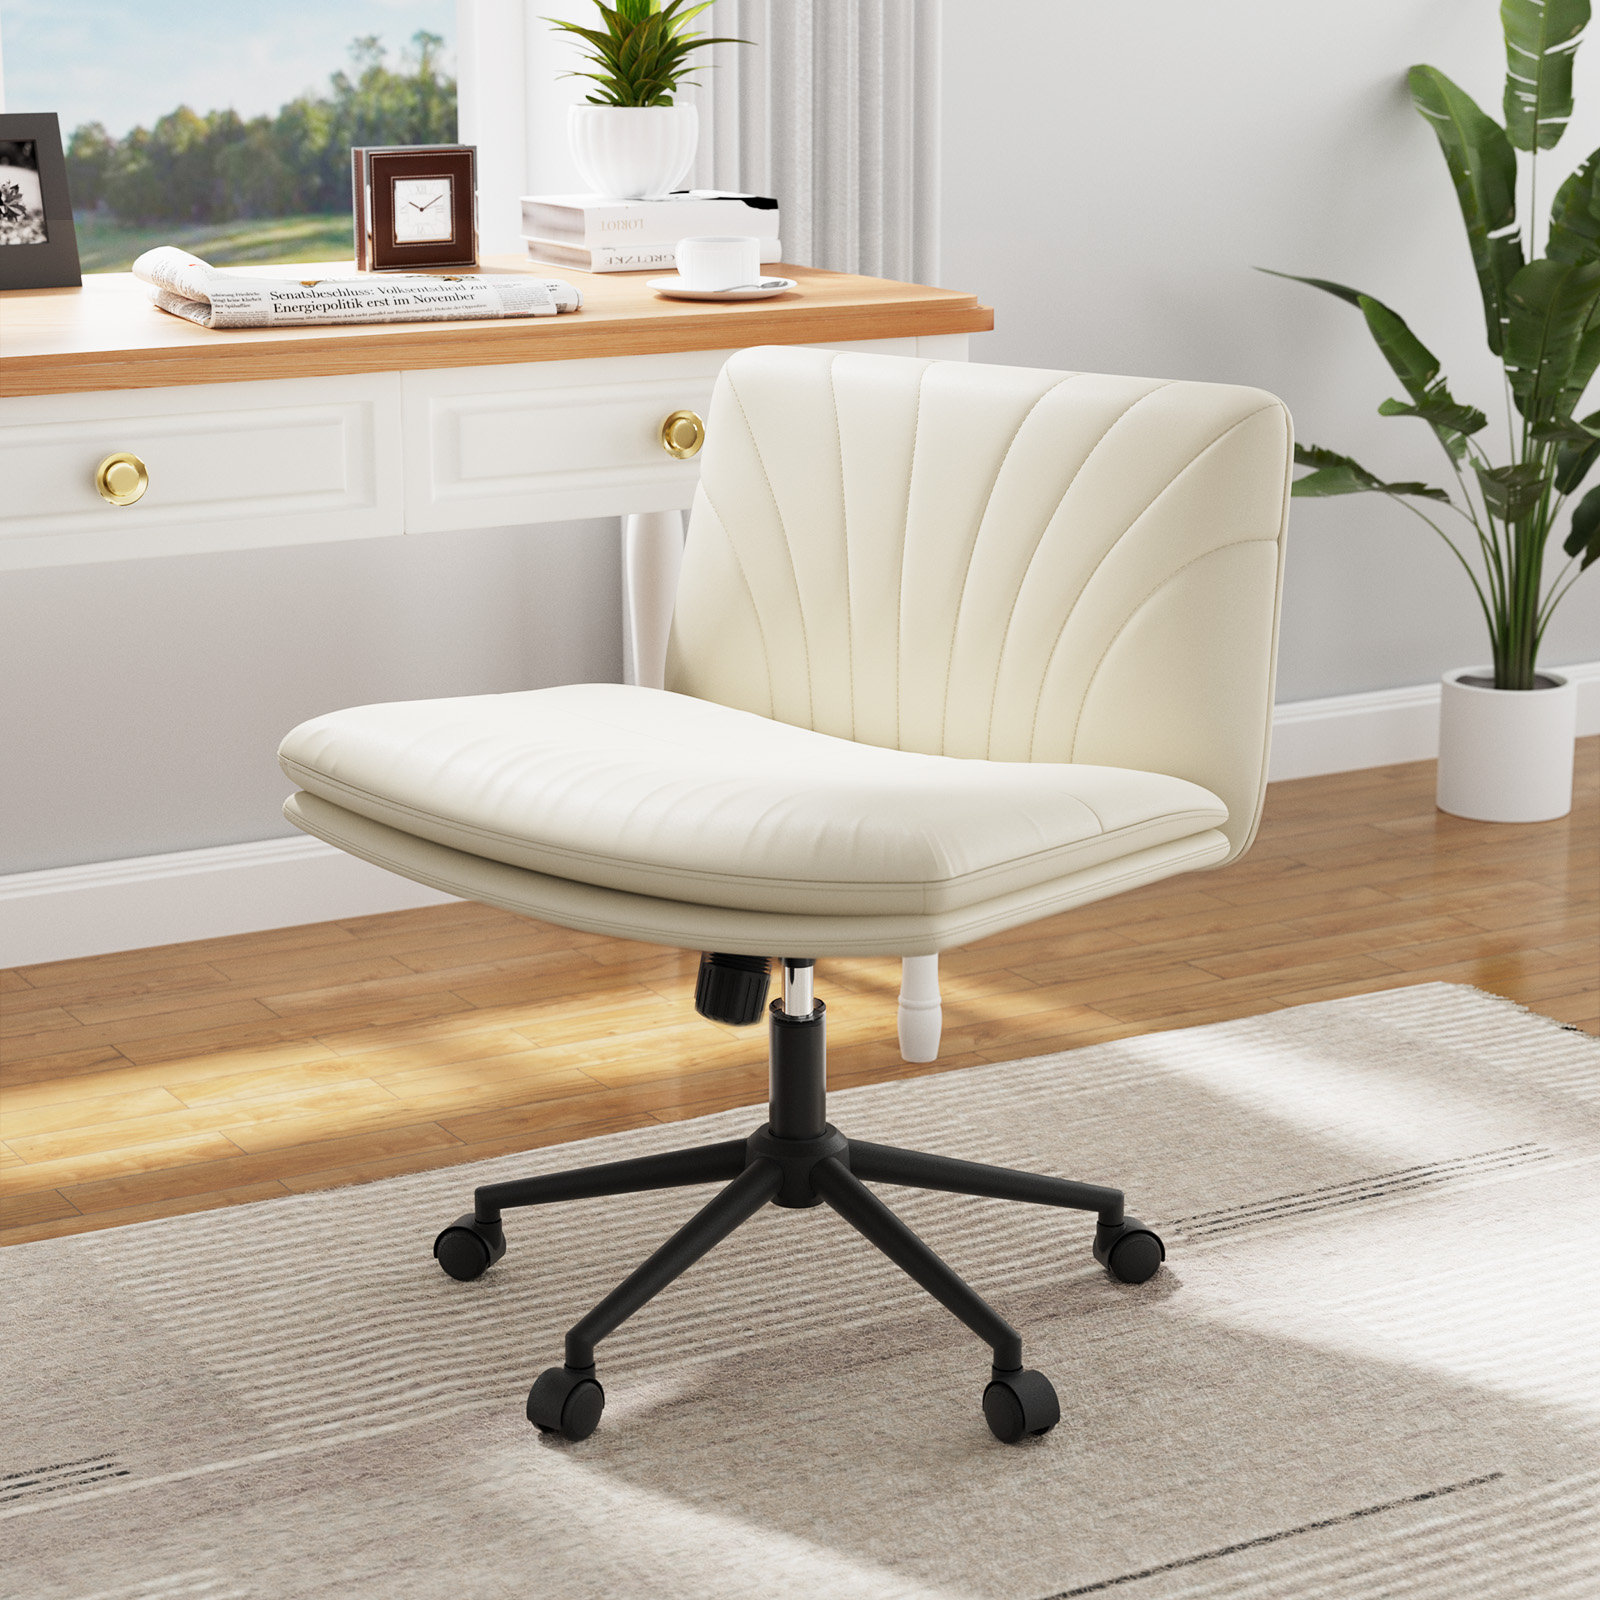 Via Seating Reset Armless Work Chair with Generous Recline